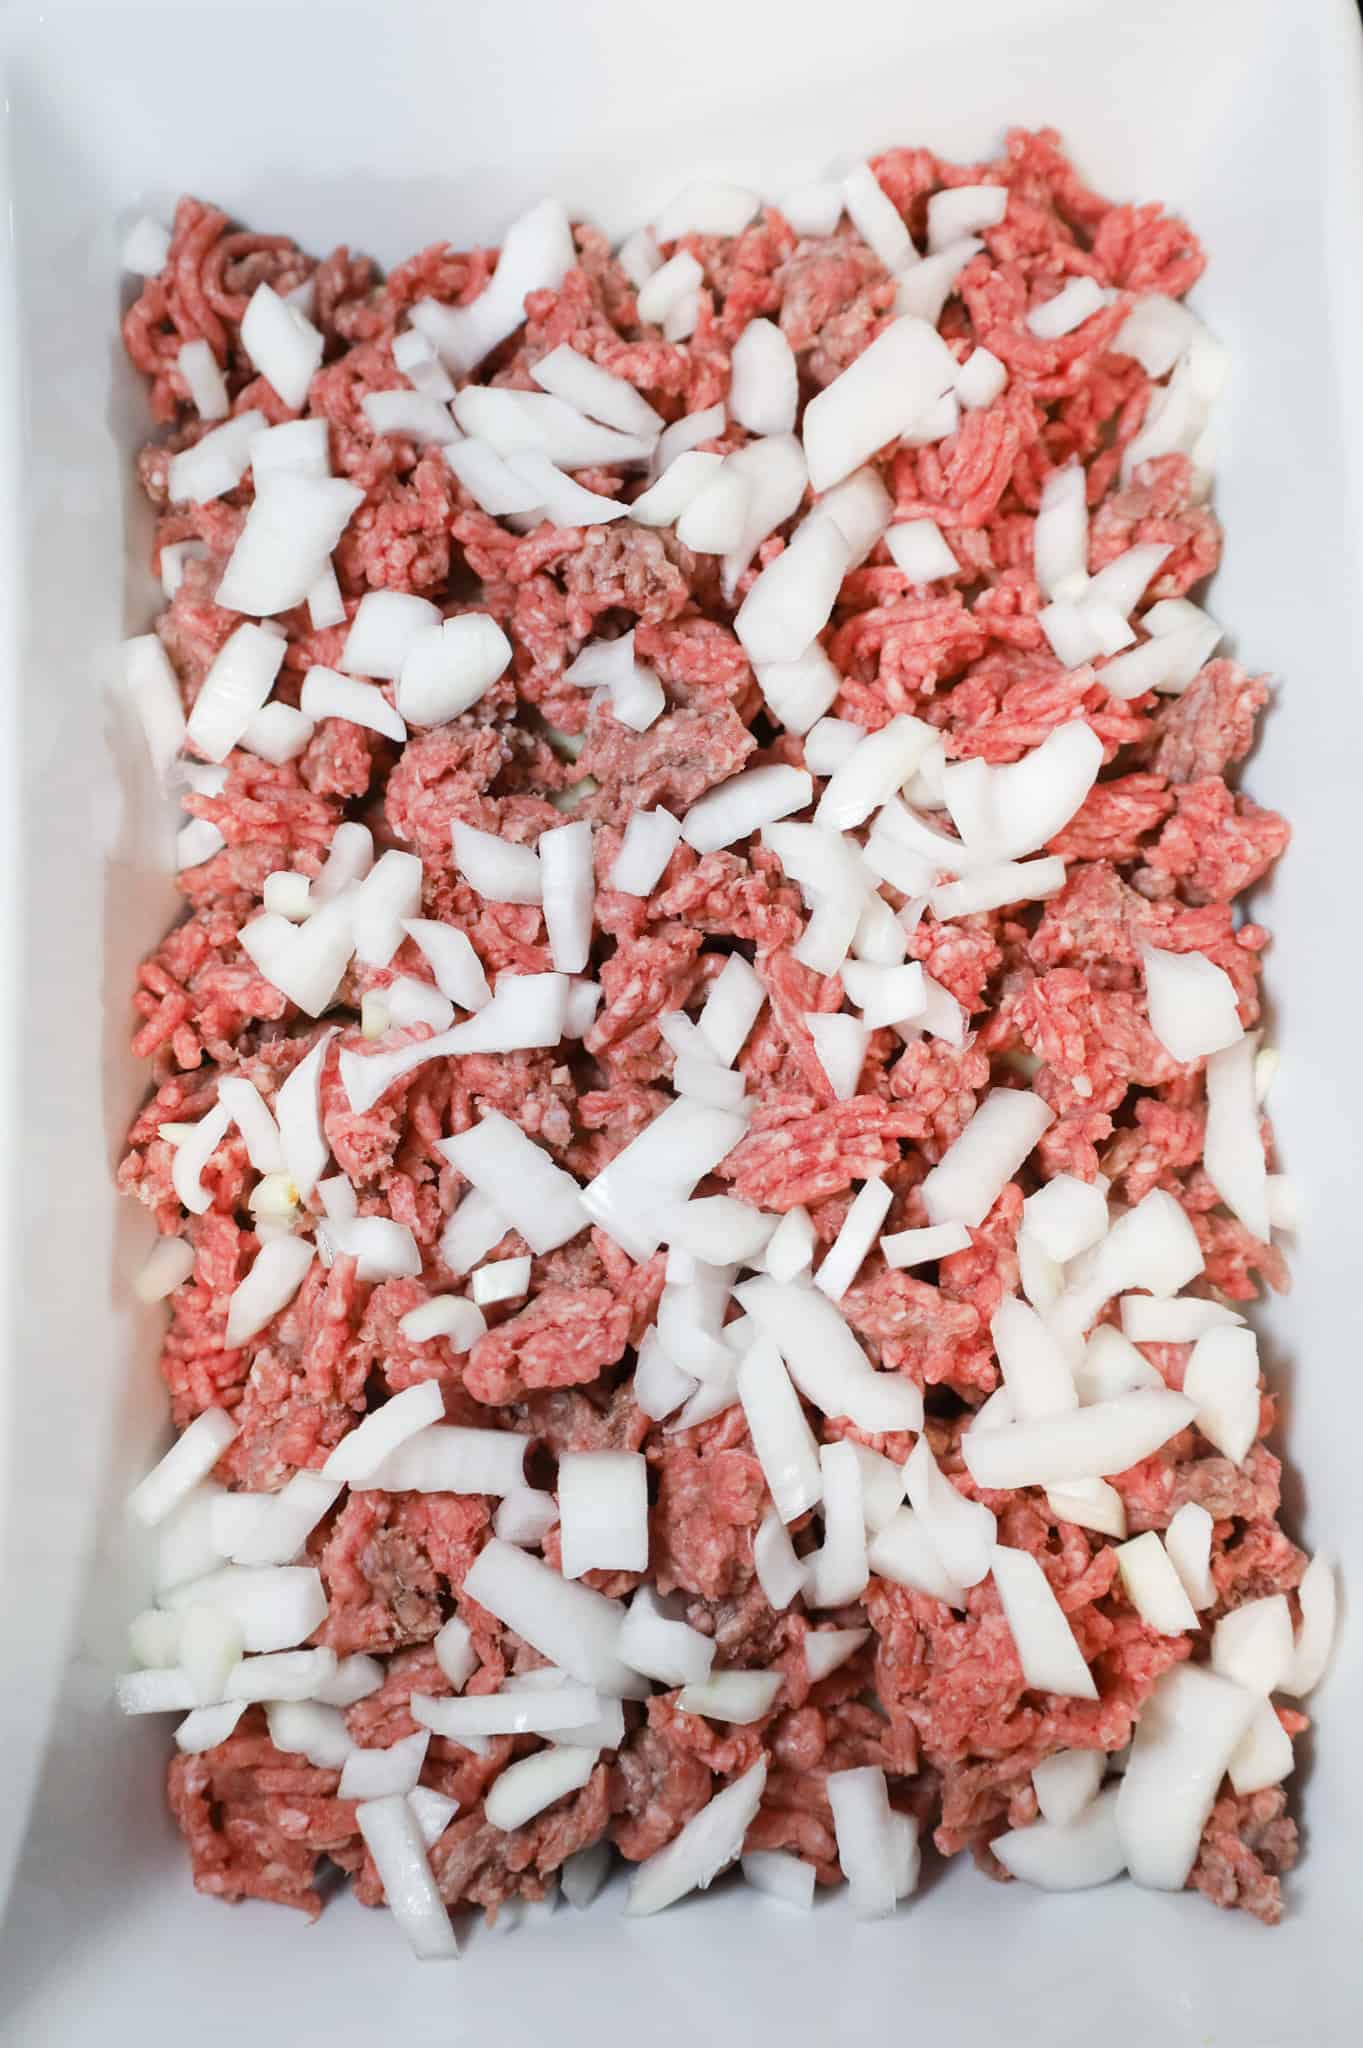 diced onions on top of raw ground beef in a casserole dish